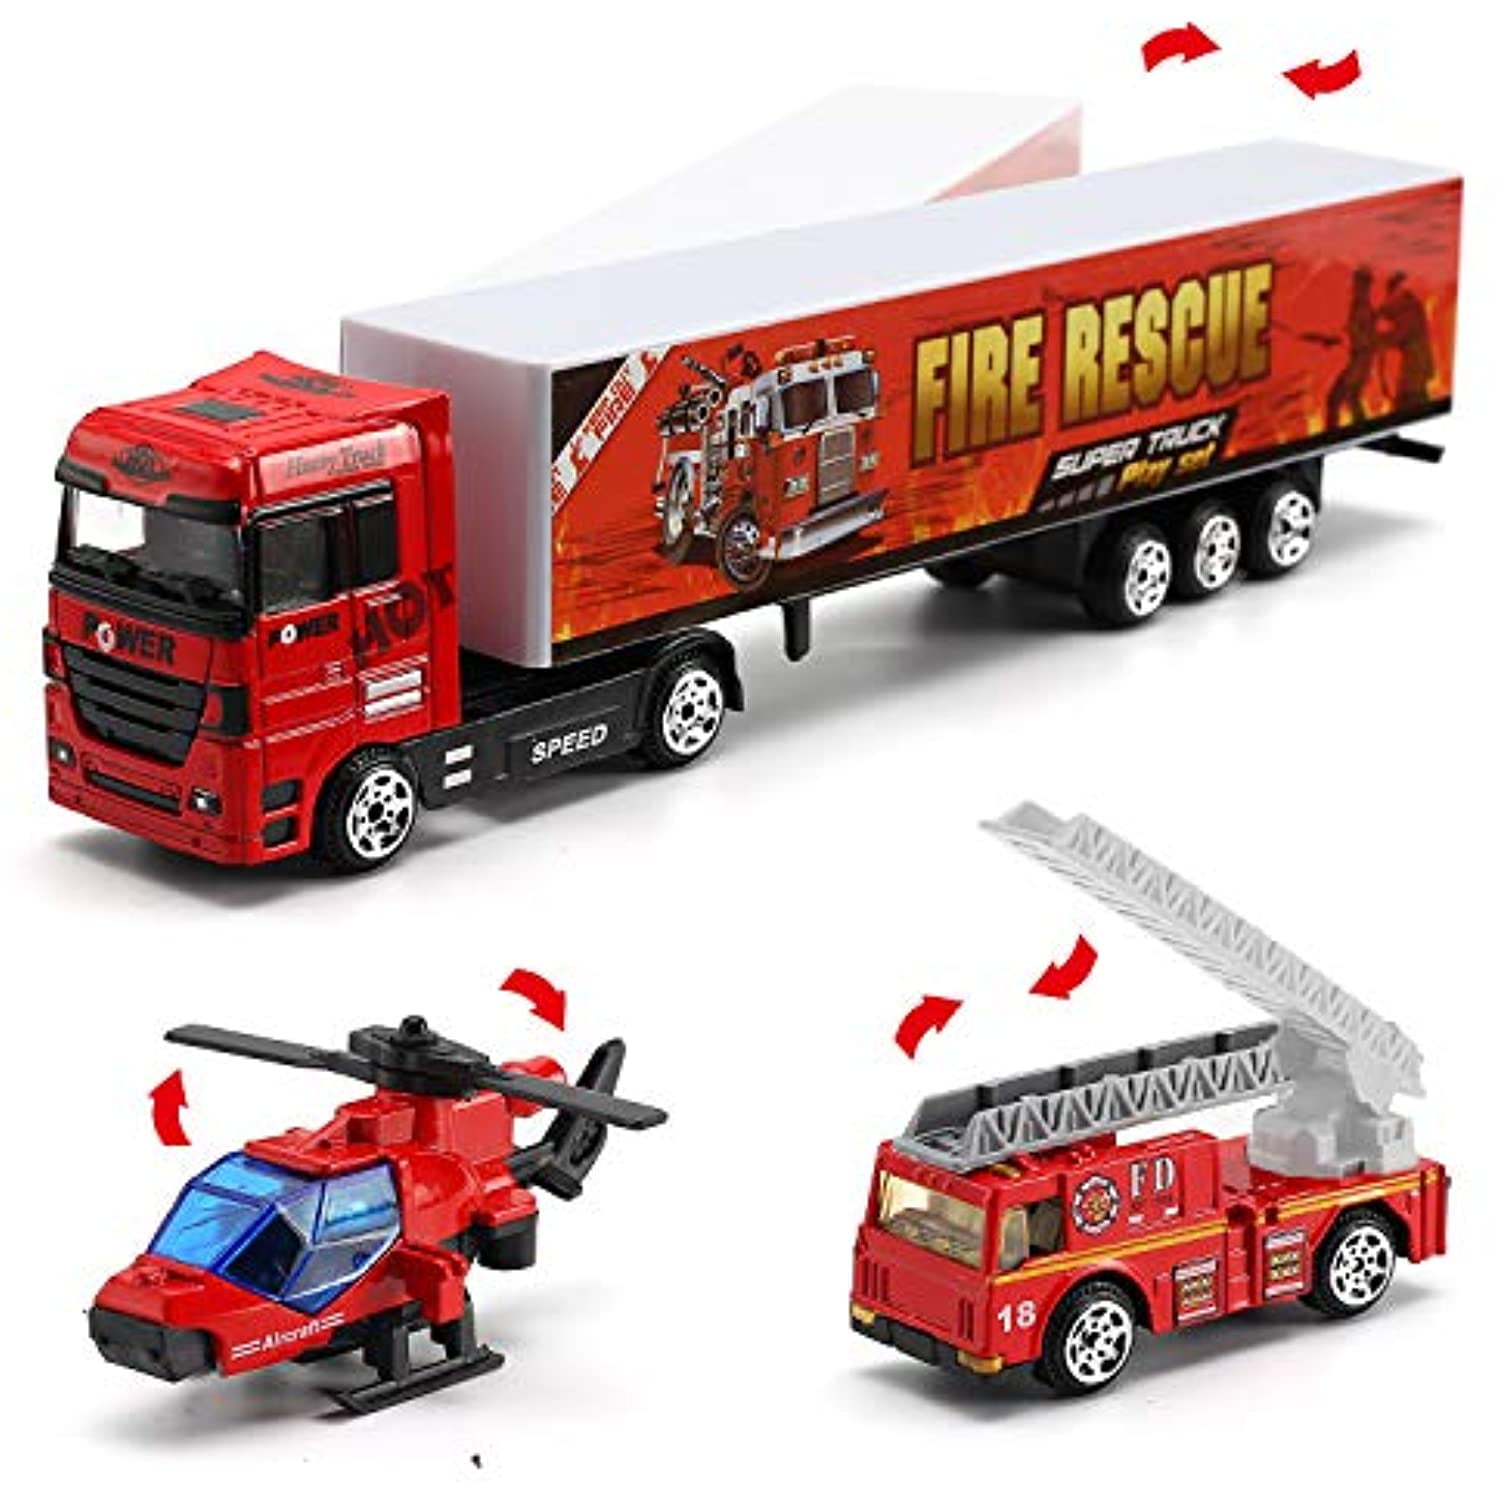 deAO Fire Rescue 35 Piece Emergency Service Alloy Vehicle Fire Fighter Play Set 